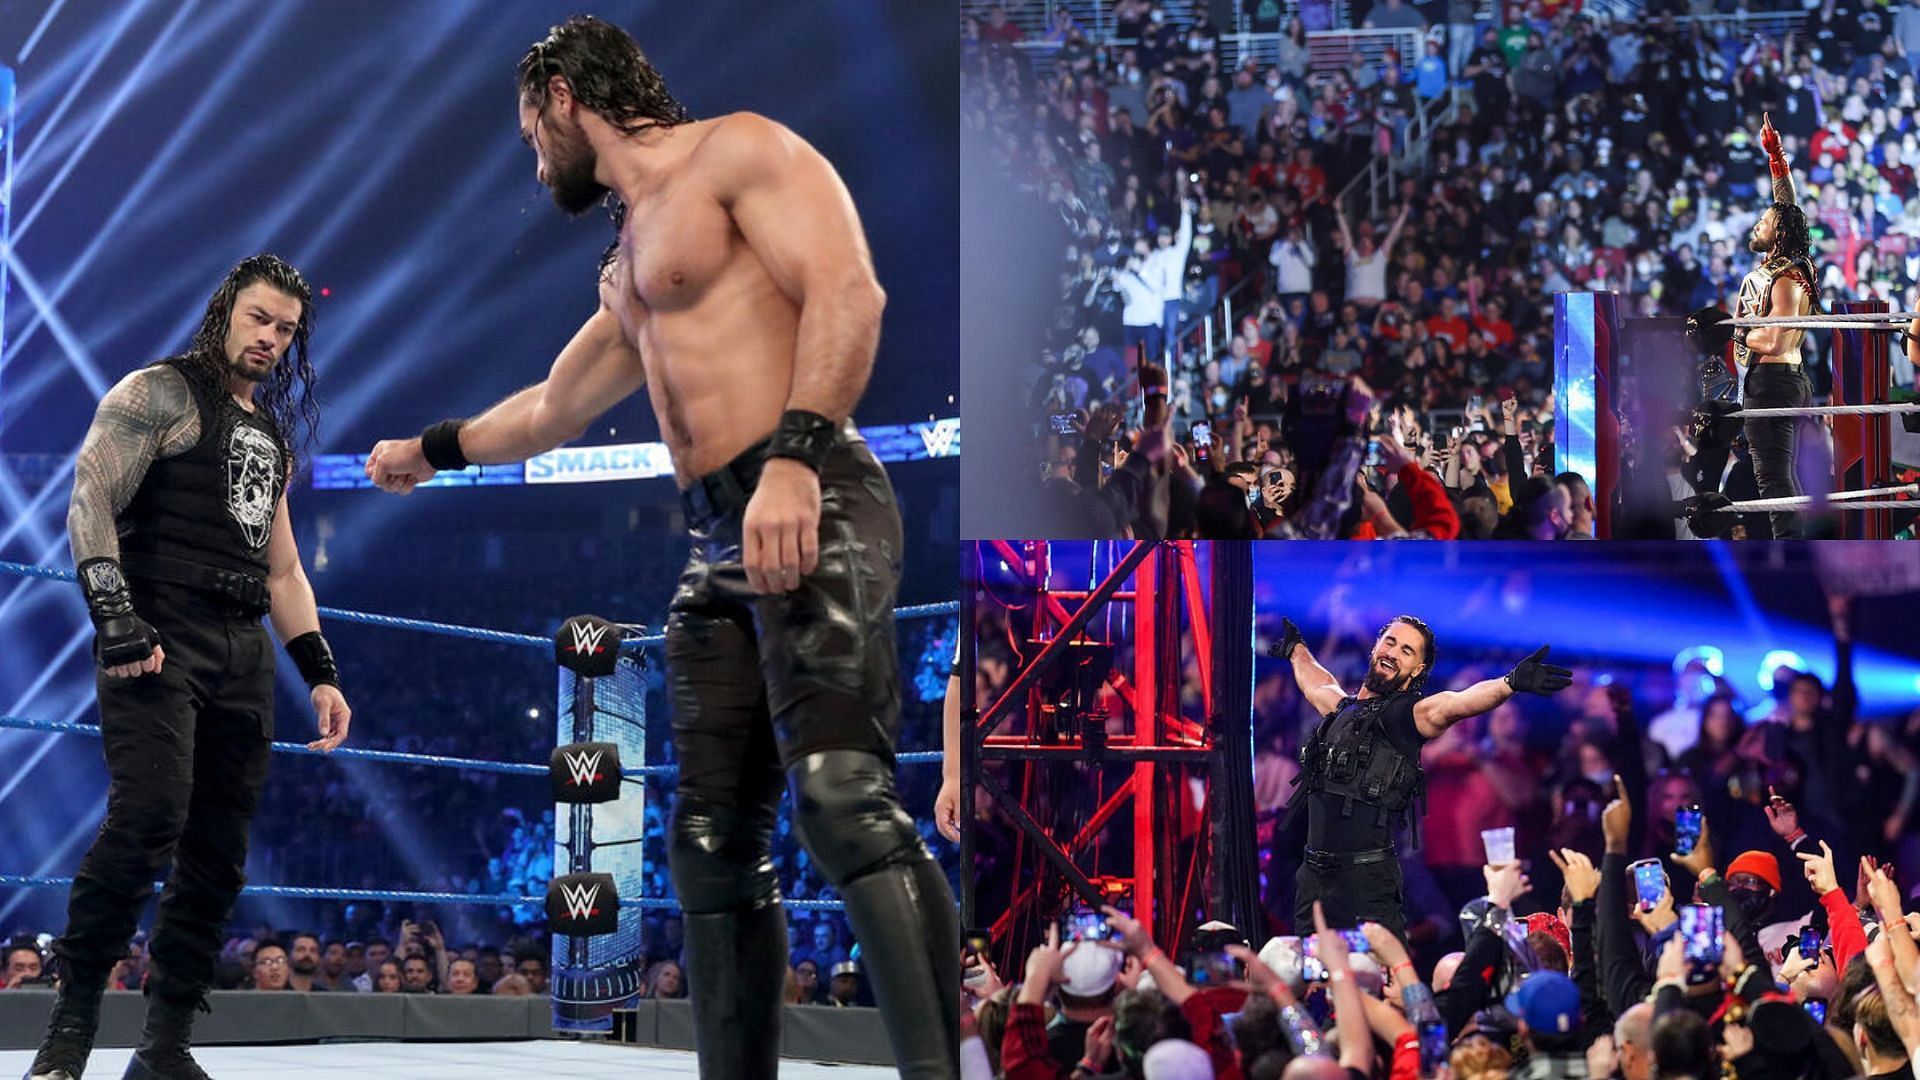 Seth Rollins and Roman Reigns are former Shield members